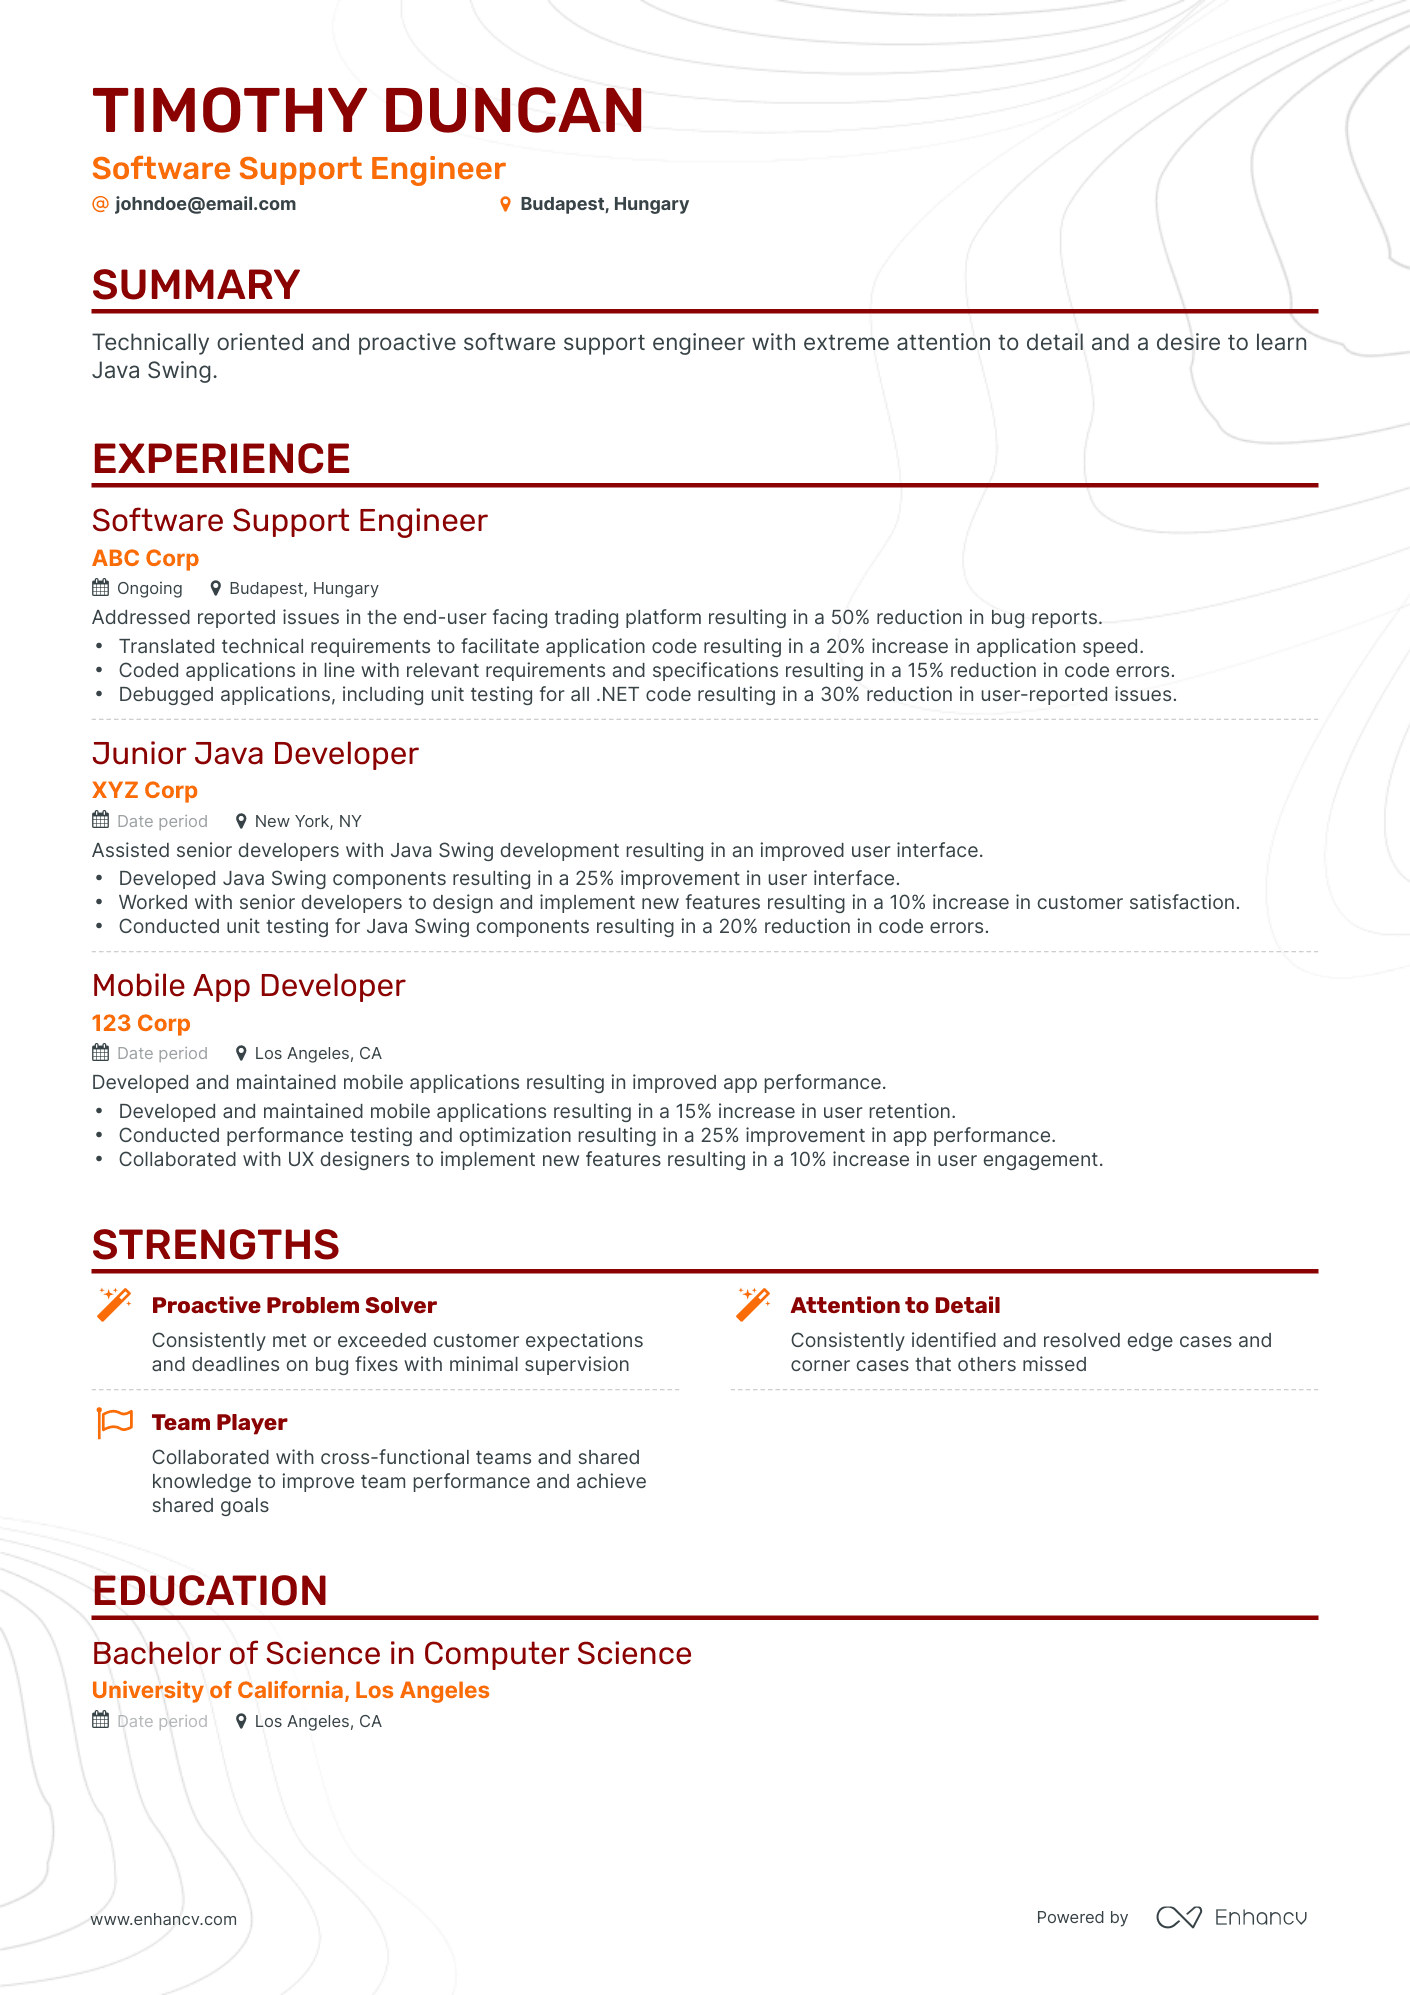 Classic Software Support Engineer Resume Template